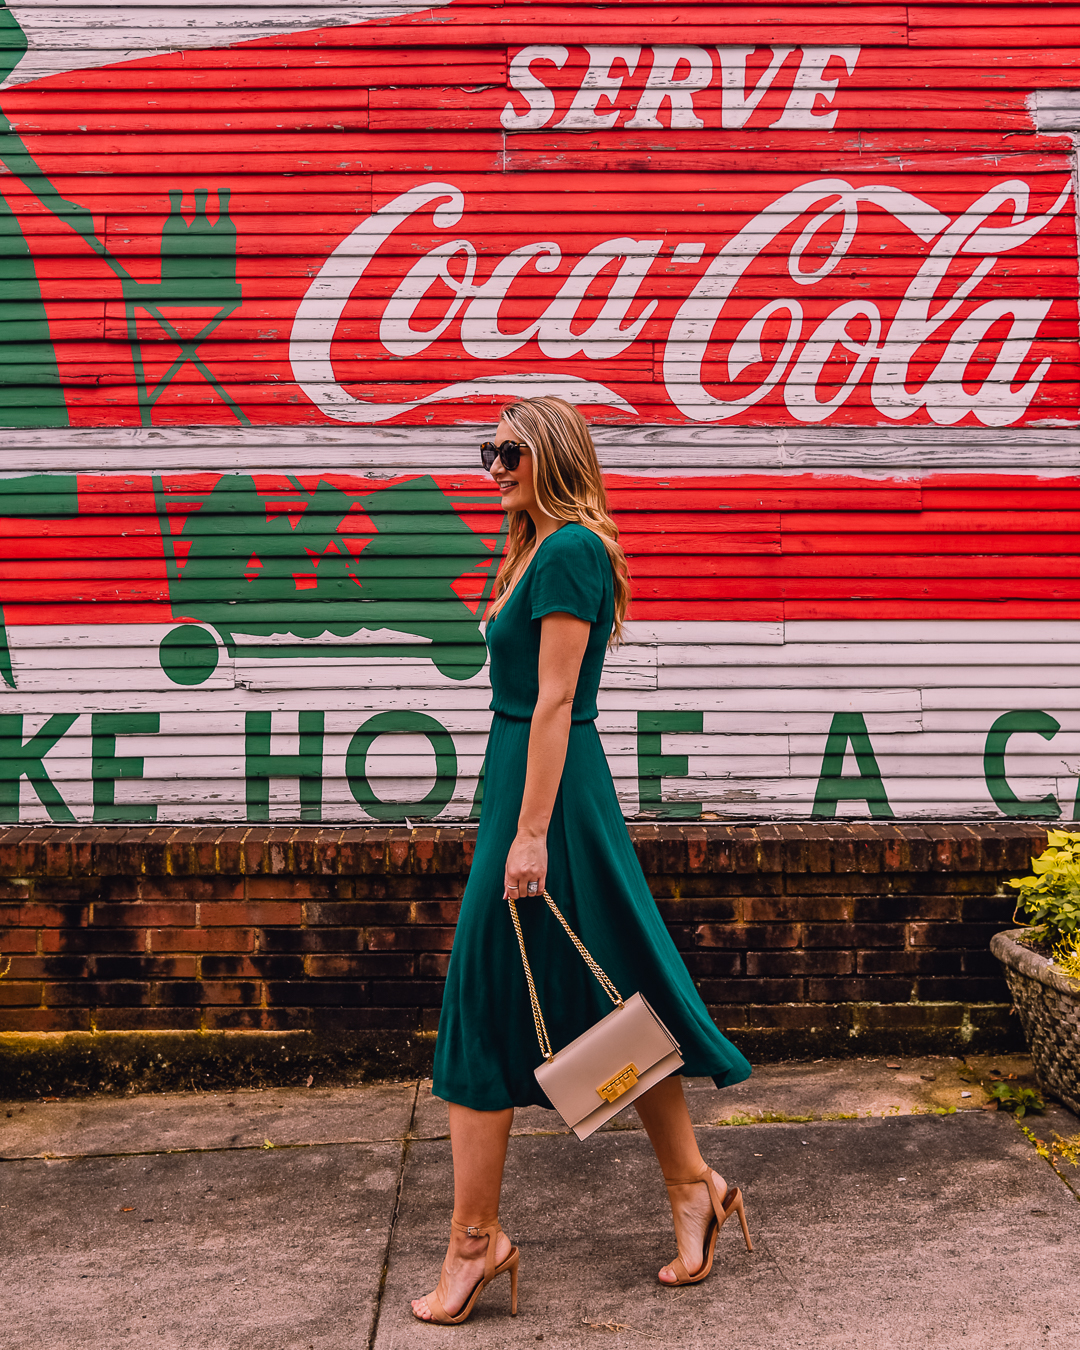 coca cola mural in raleigh north carolina - most instagrammable places in raleigh